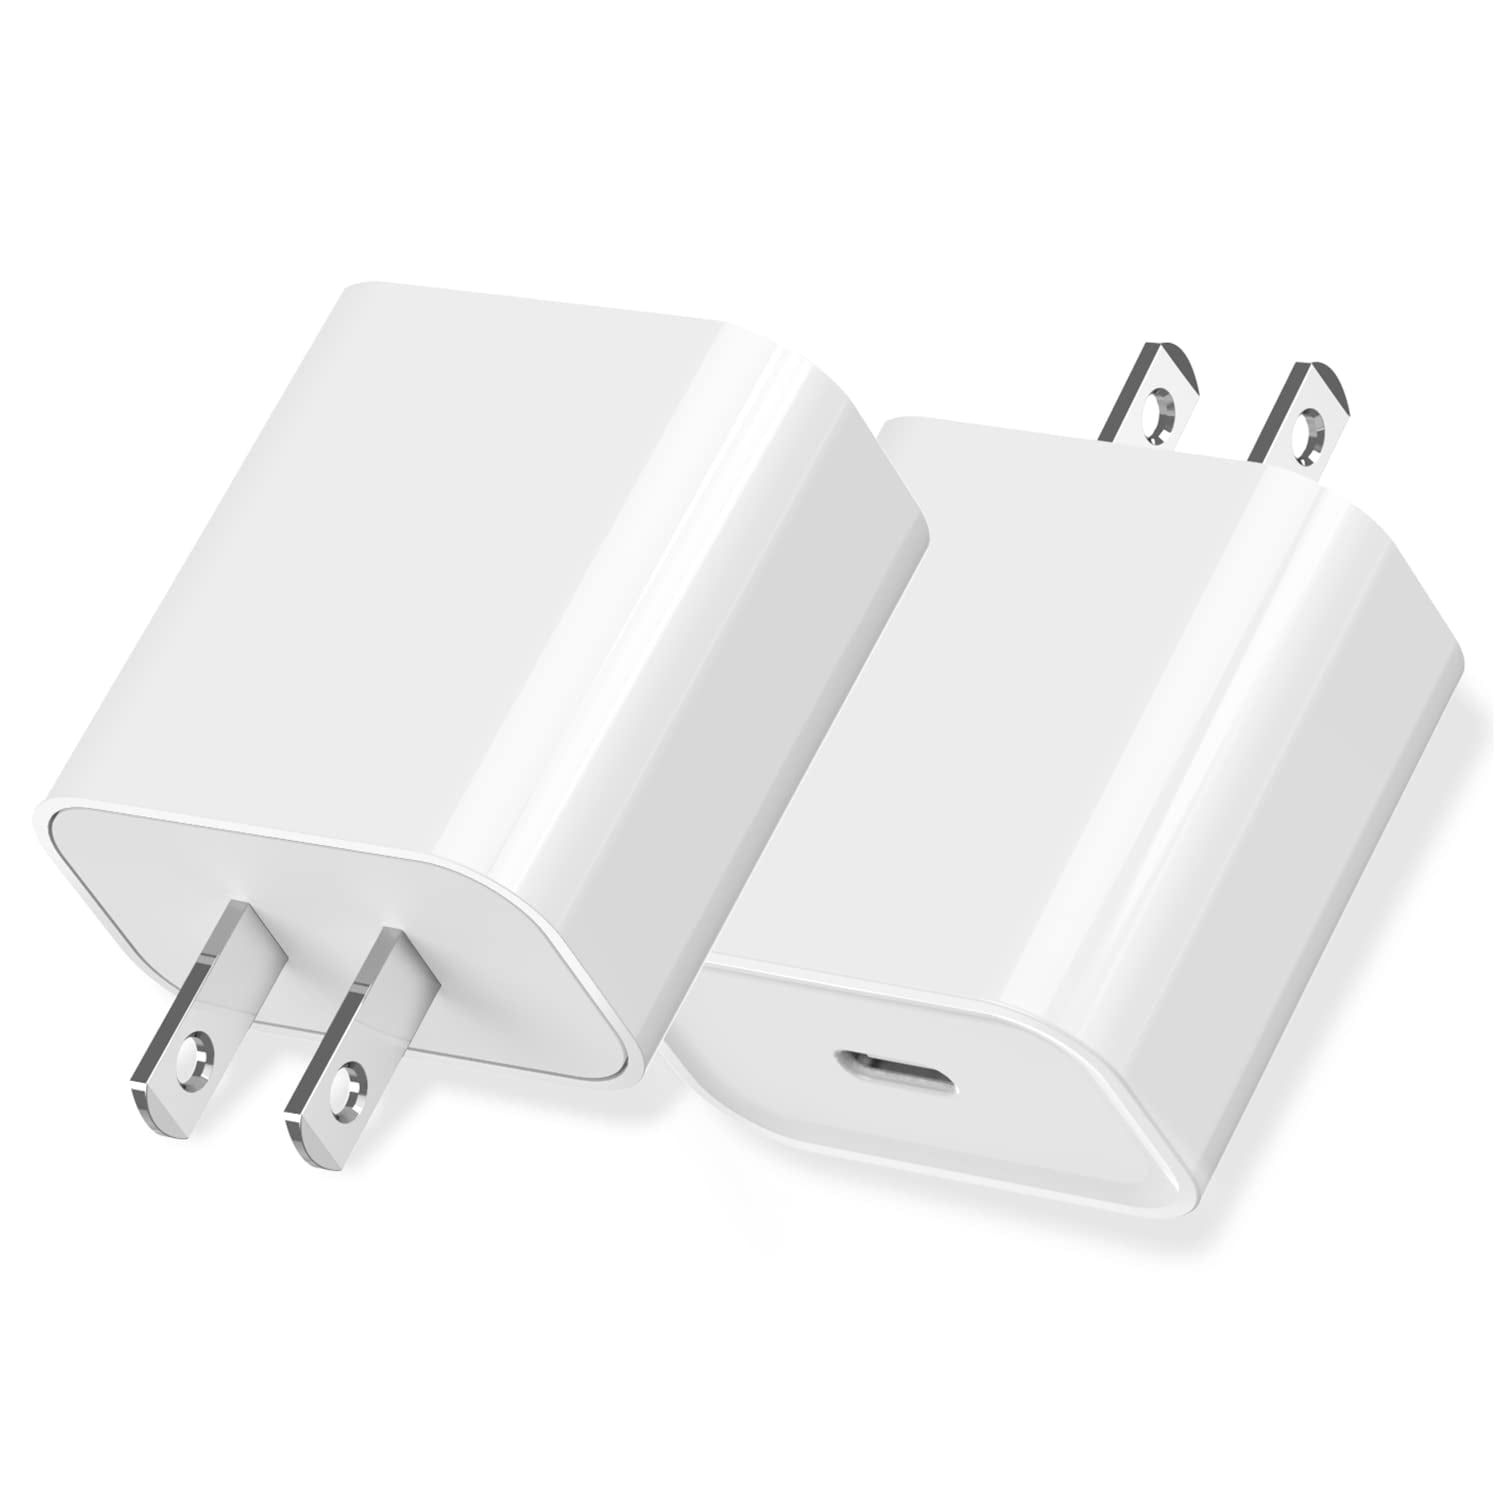 for iPhone 14 PRO Max Original Adapter Pd 20W Charger USB-C Fast Charger EU  Us UK Plug Type C Wall Charger Cable for Apple 13 12 - China Mobile Phone  Charger for